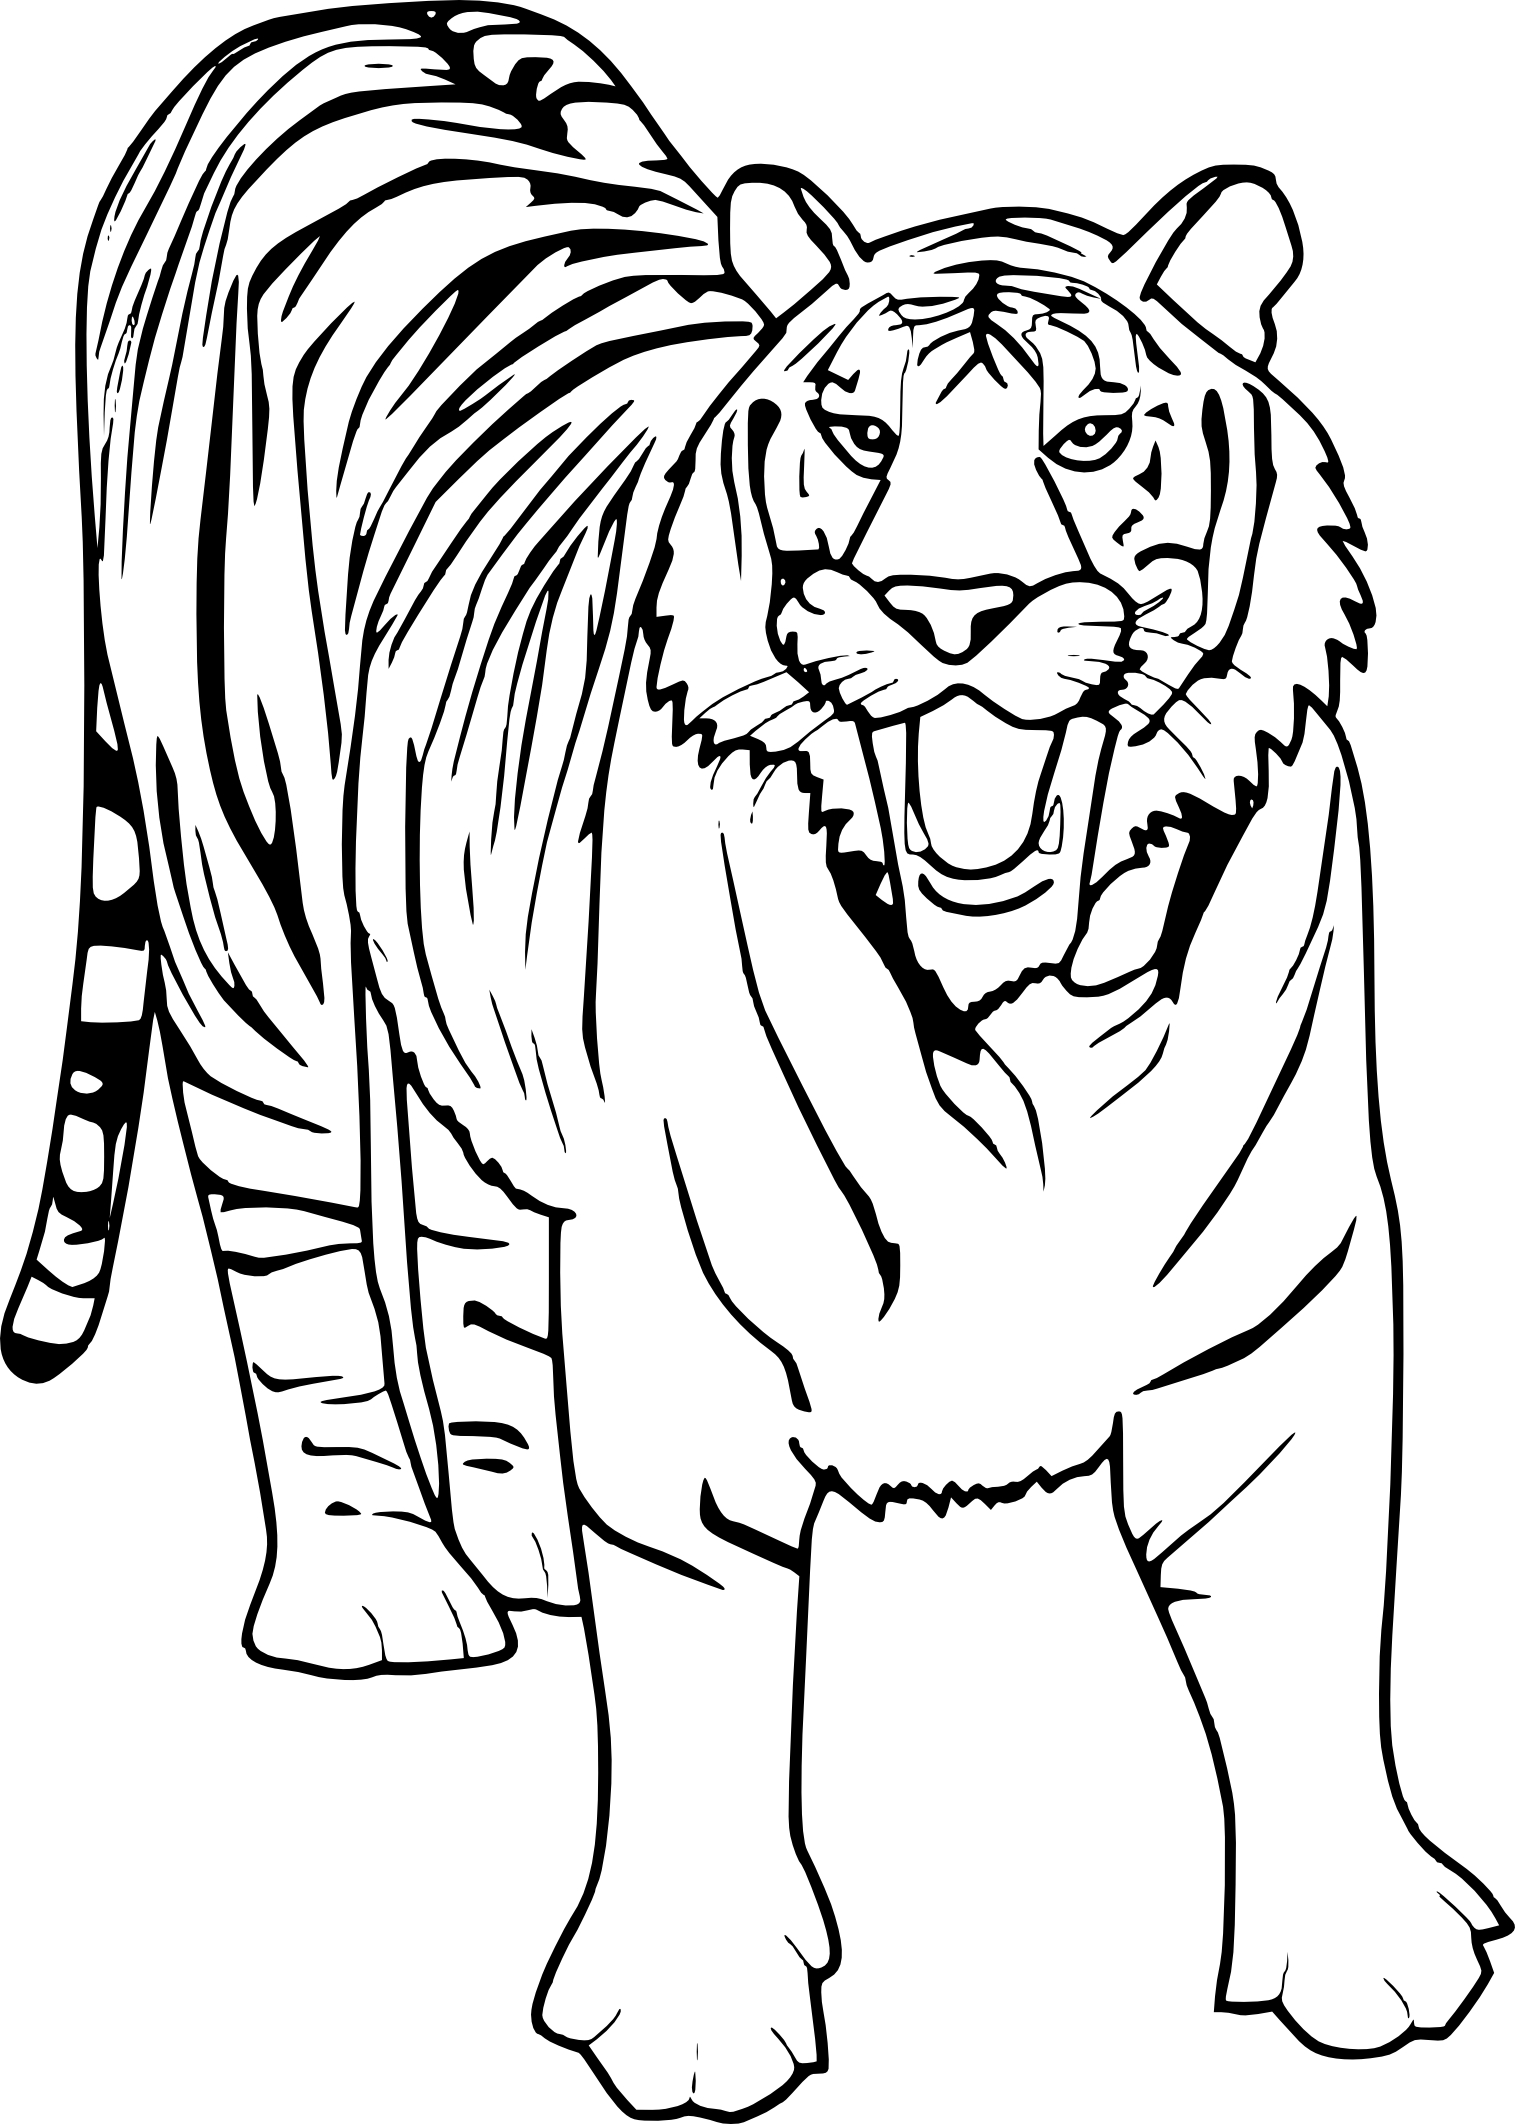 Tiger drawing and coloring page